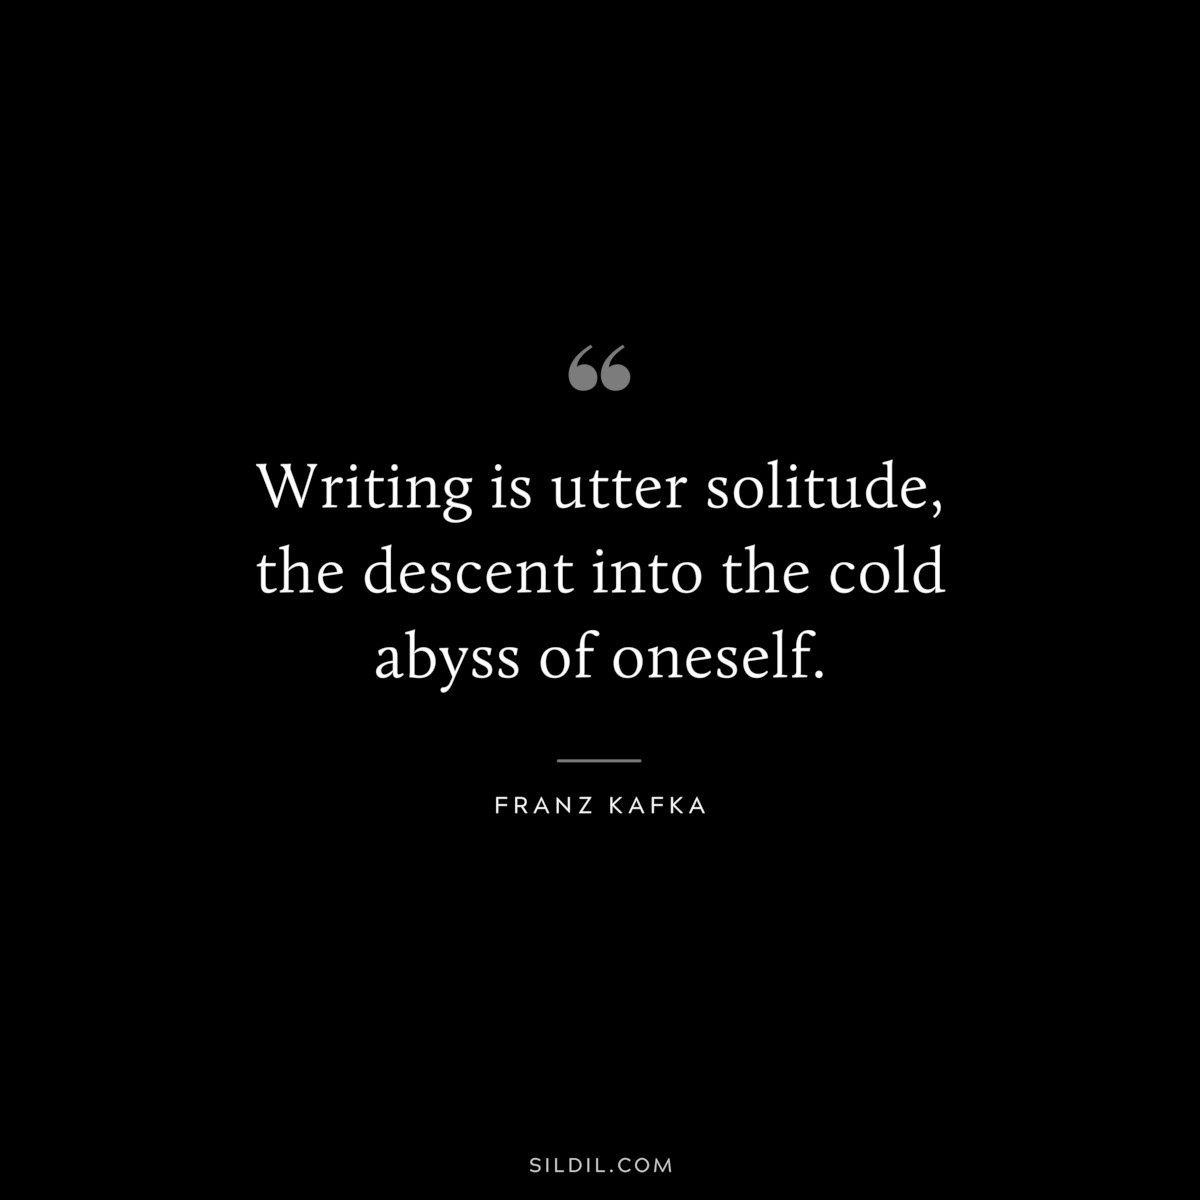 Writing is utter solitude, the descent into the cold abyss of oneself. ― Franz Kafka